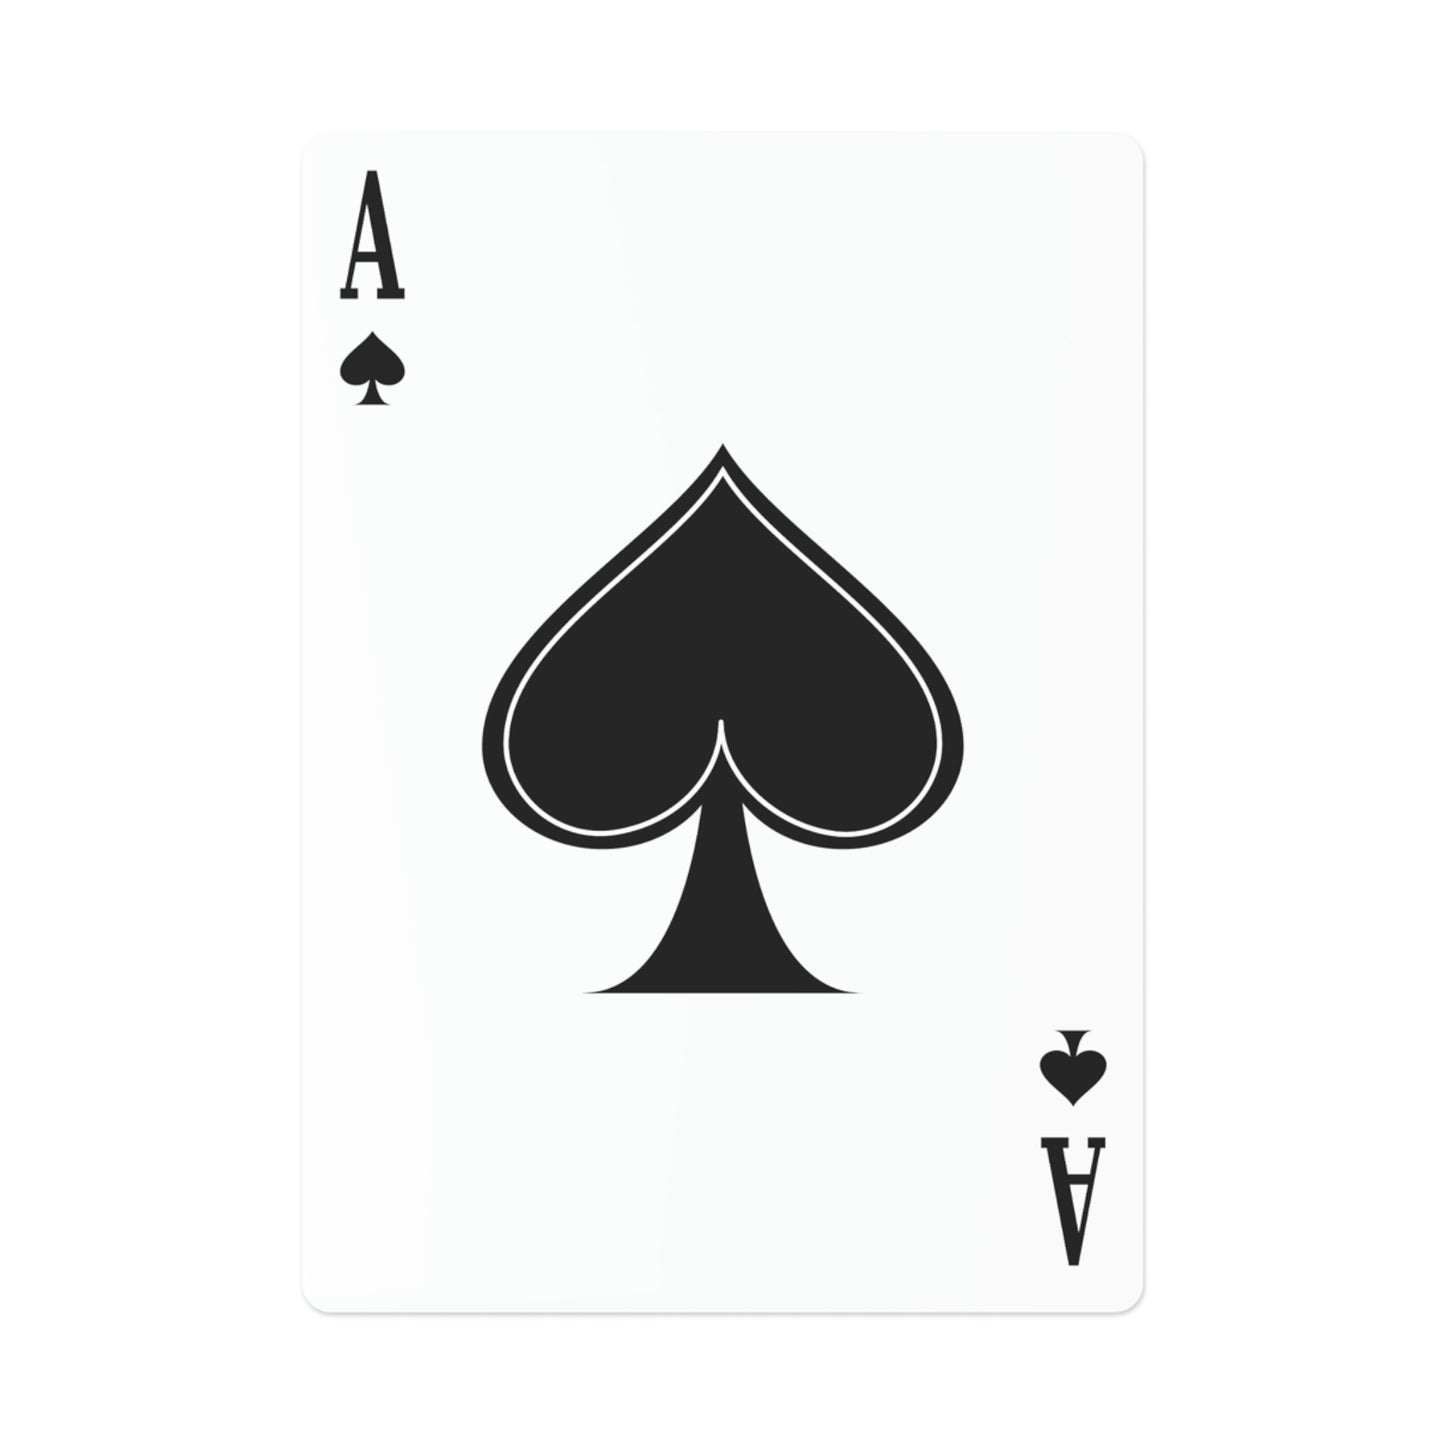 Once I Was A Soldier - Playing Cards